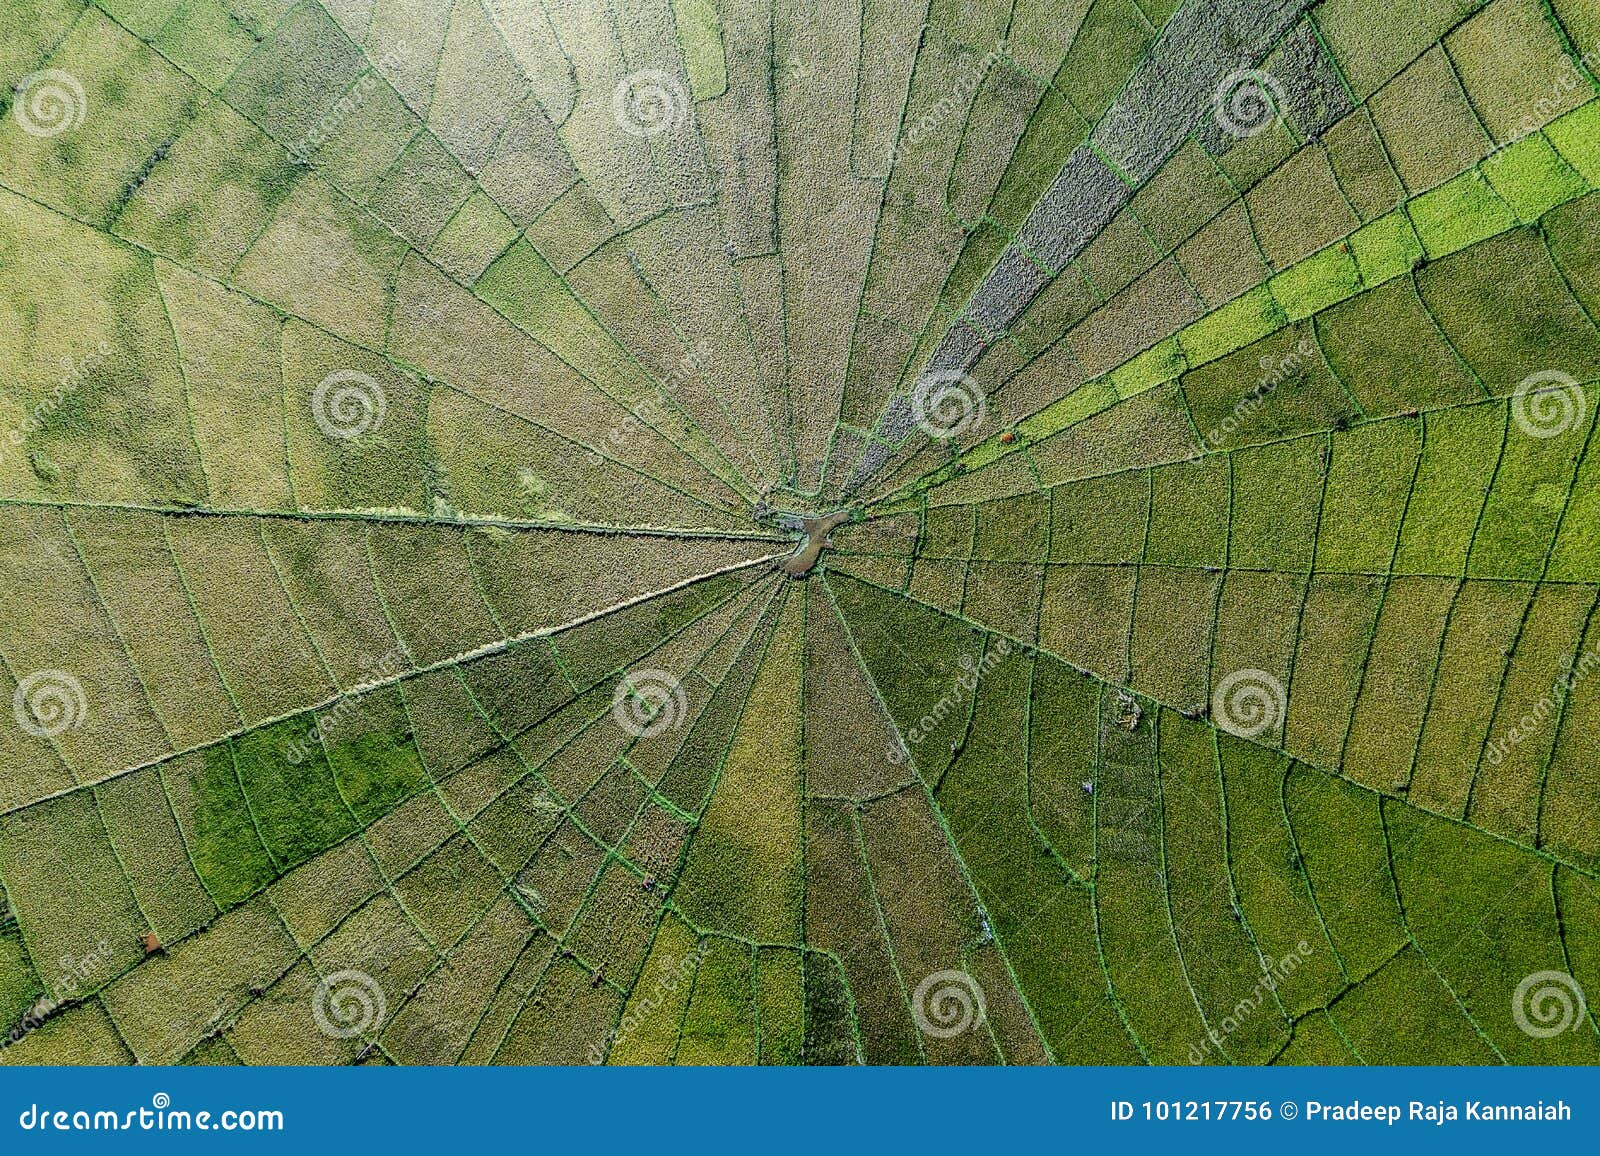 aerial view of spider net paddy field located in meler village, ruteng, flores, indonesia